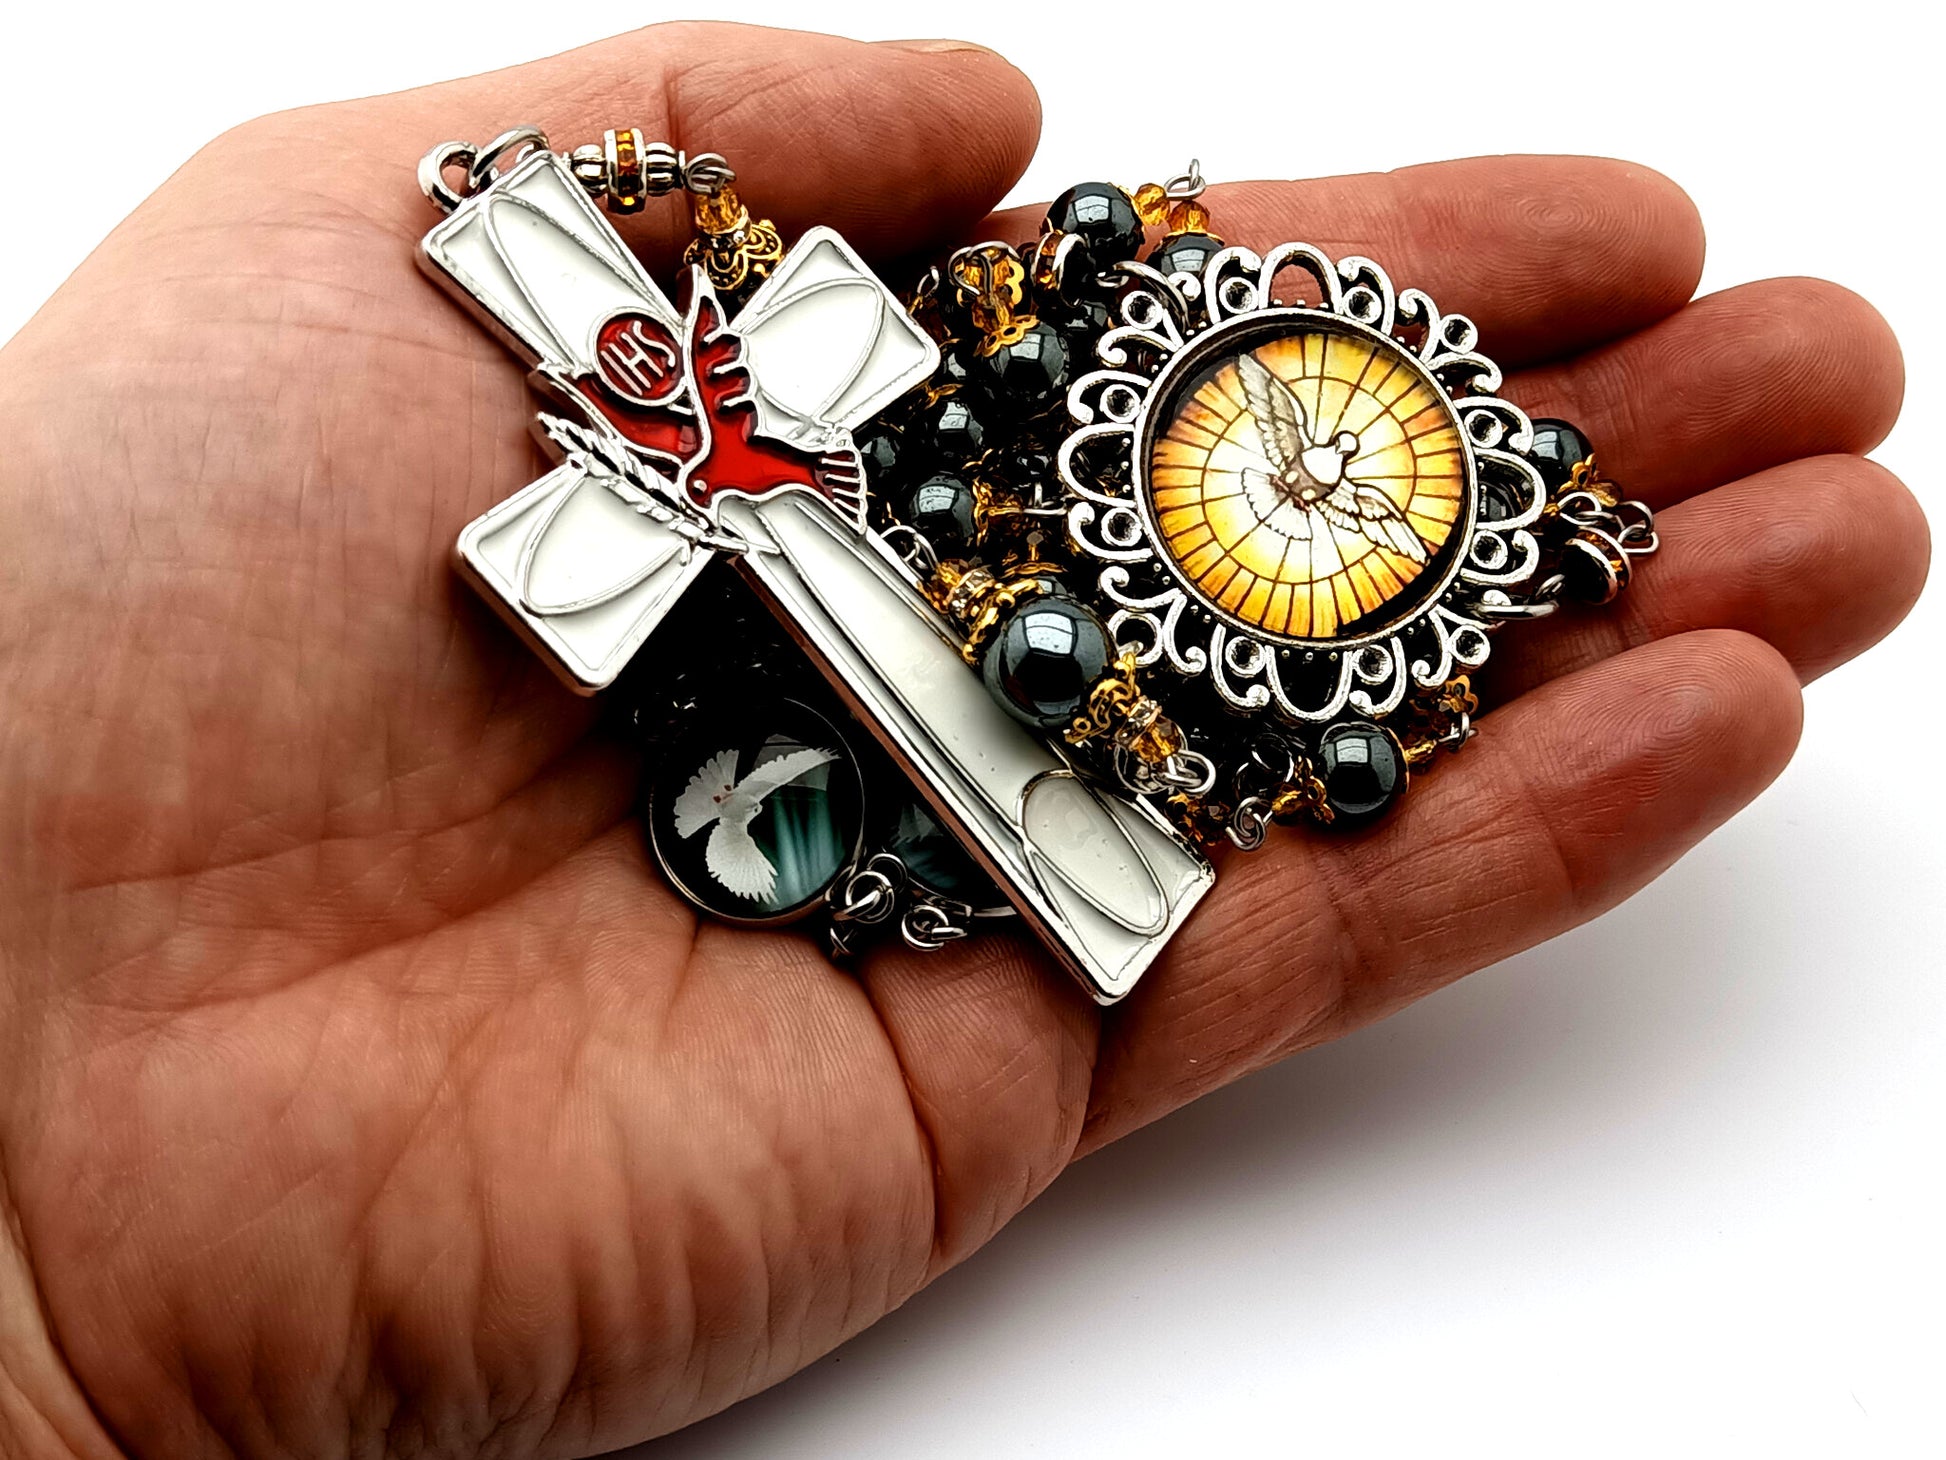 Holy Spirit unique rosary beads prayer chaplet with hematite gemstone beads and Holy Ghost enamel cross and domed linking picture medals.